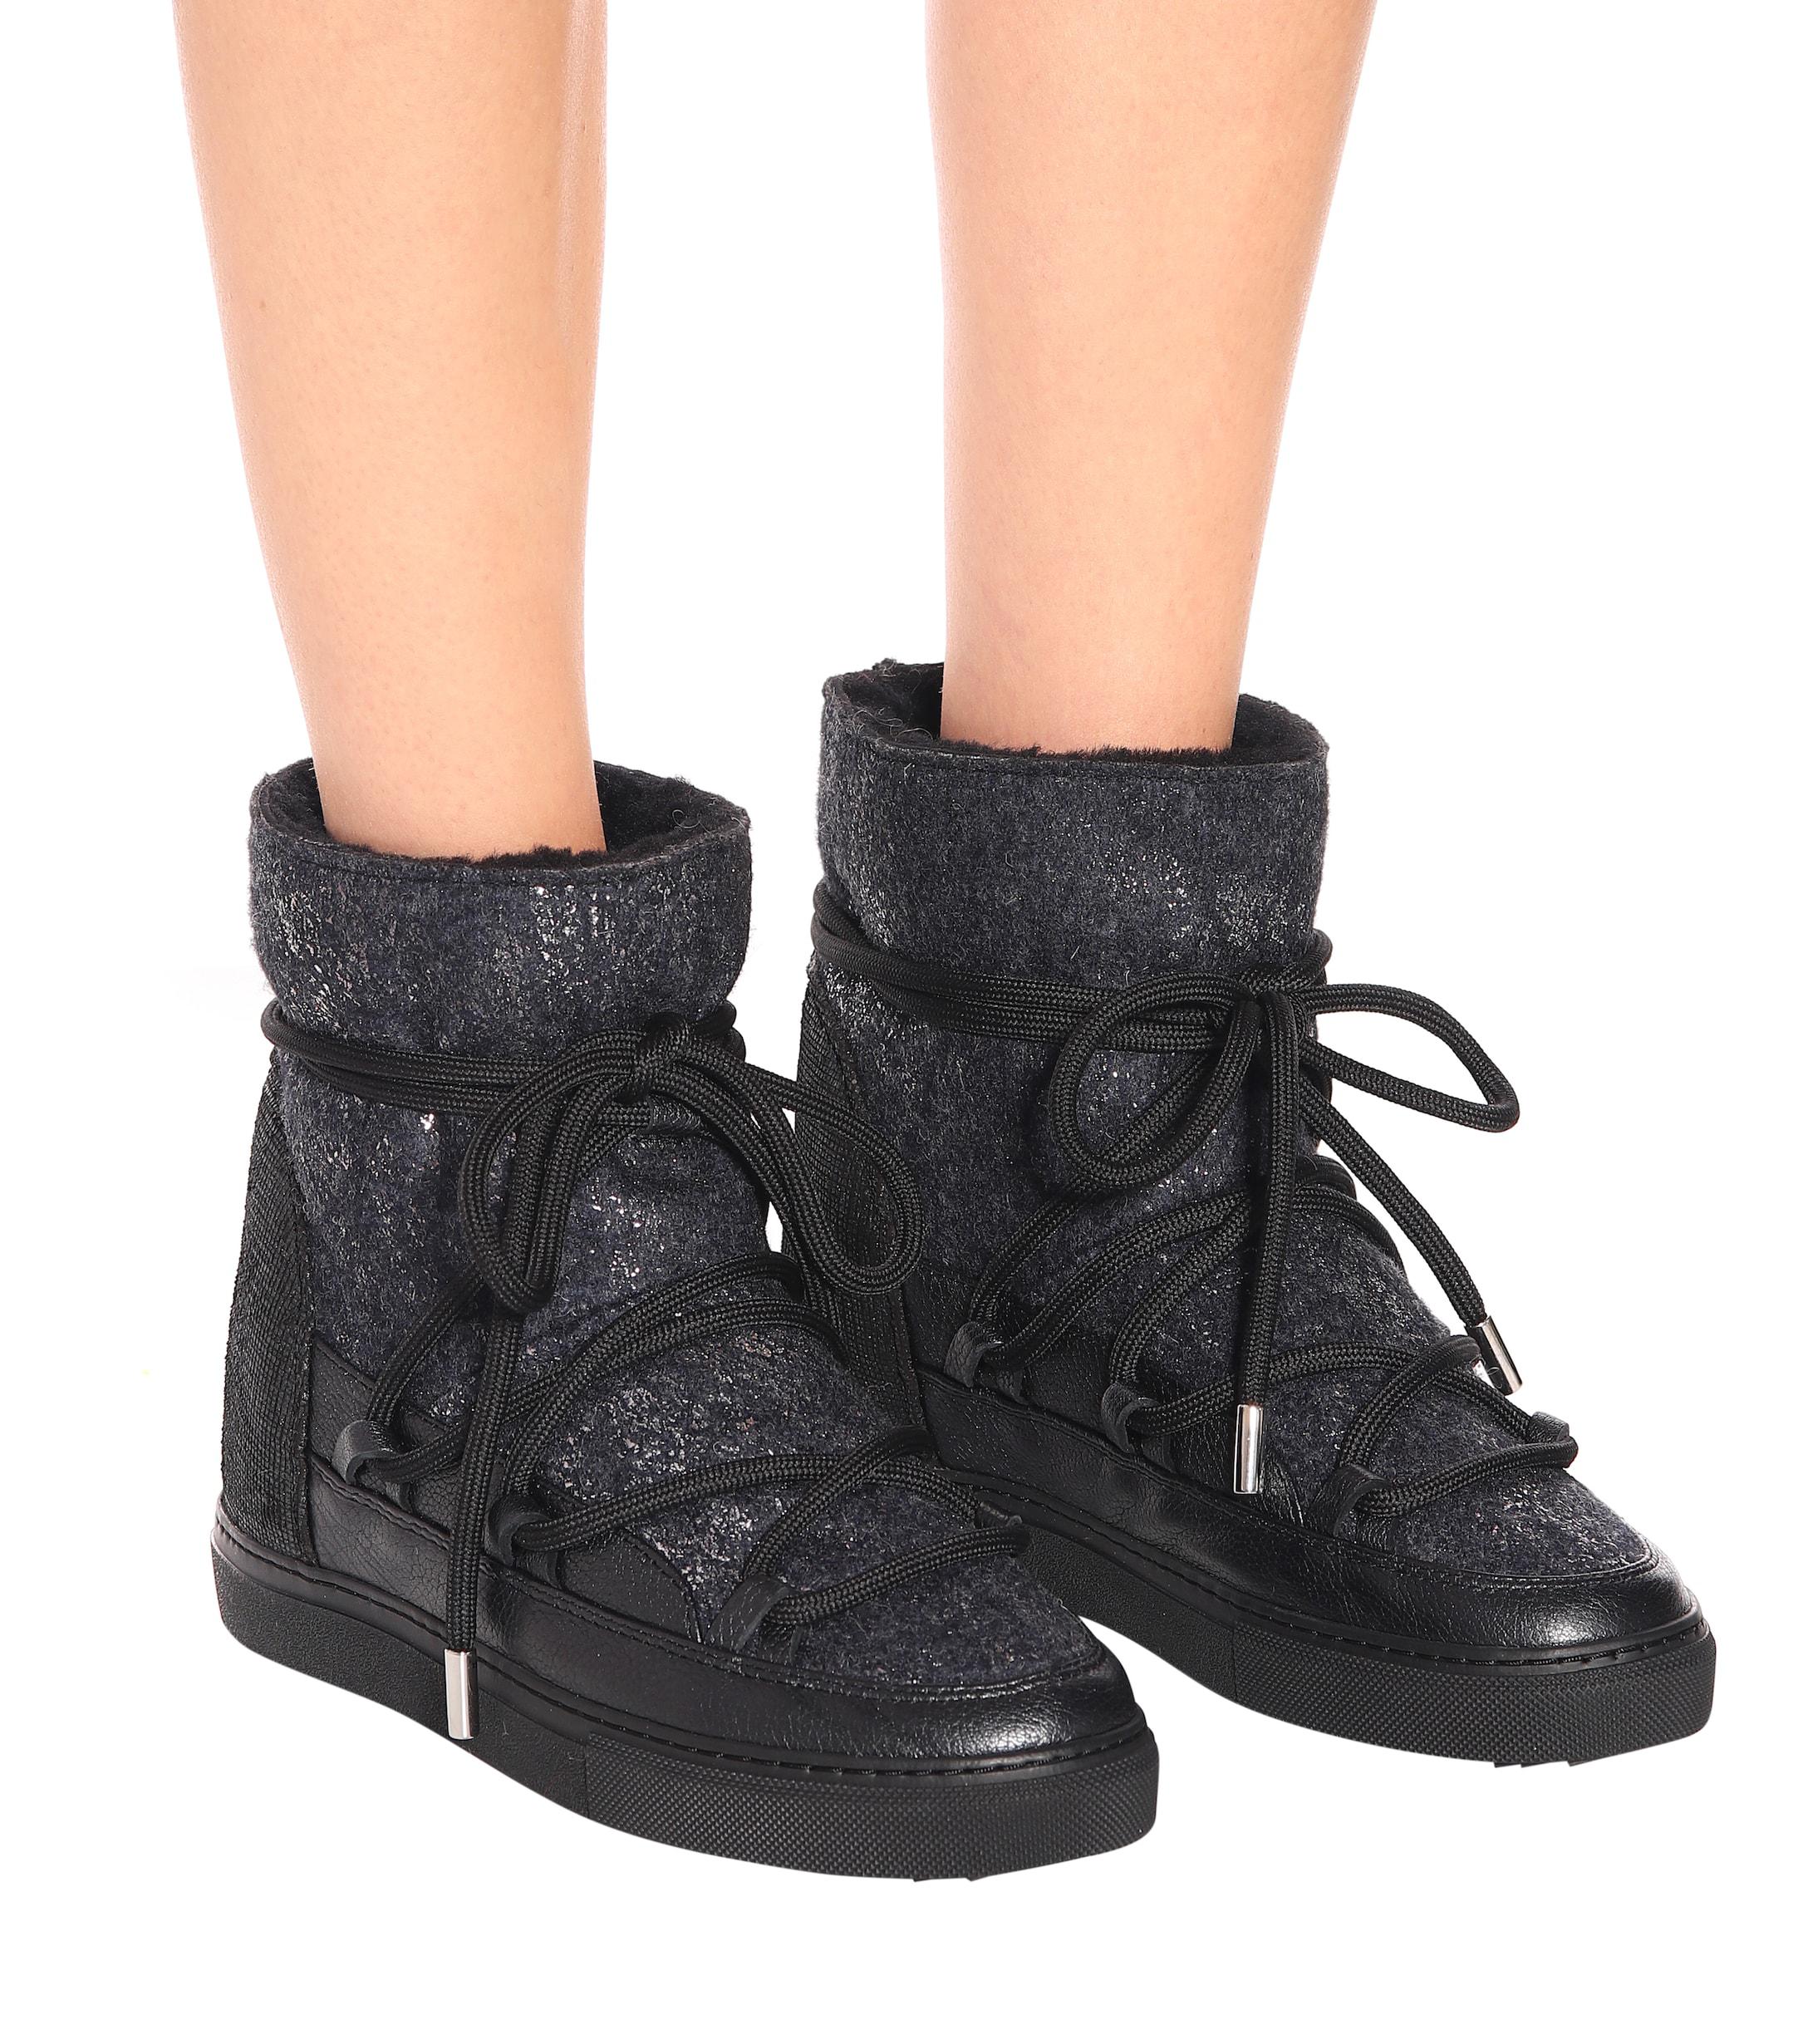 Womens Boots Inuikii Boots Inuikii Shearling And Leather Boots in Black 